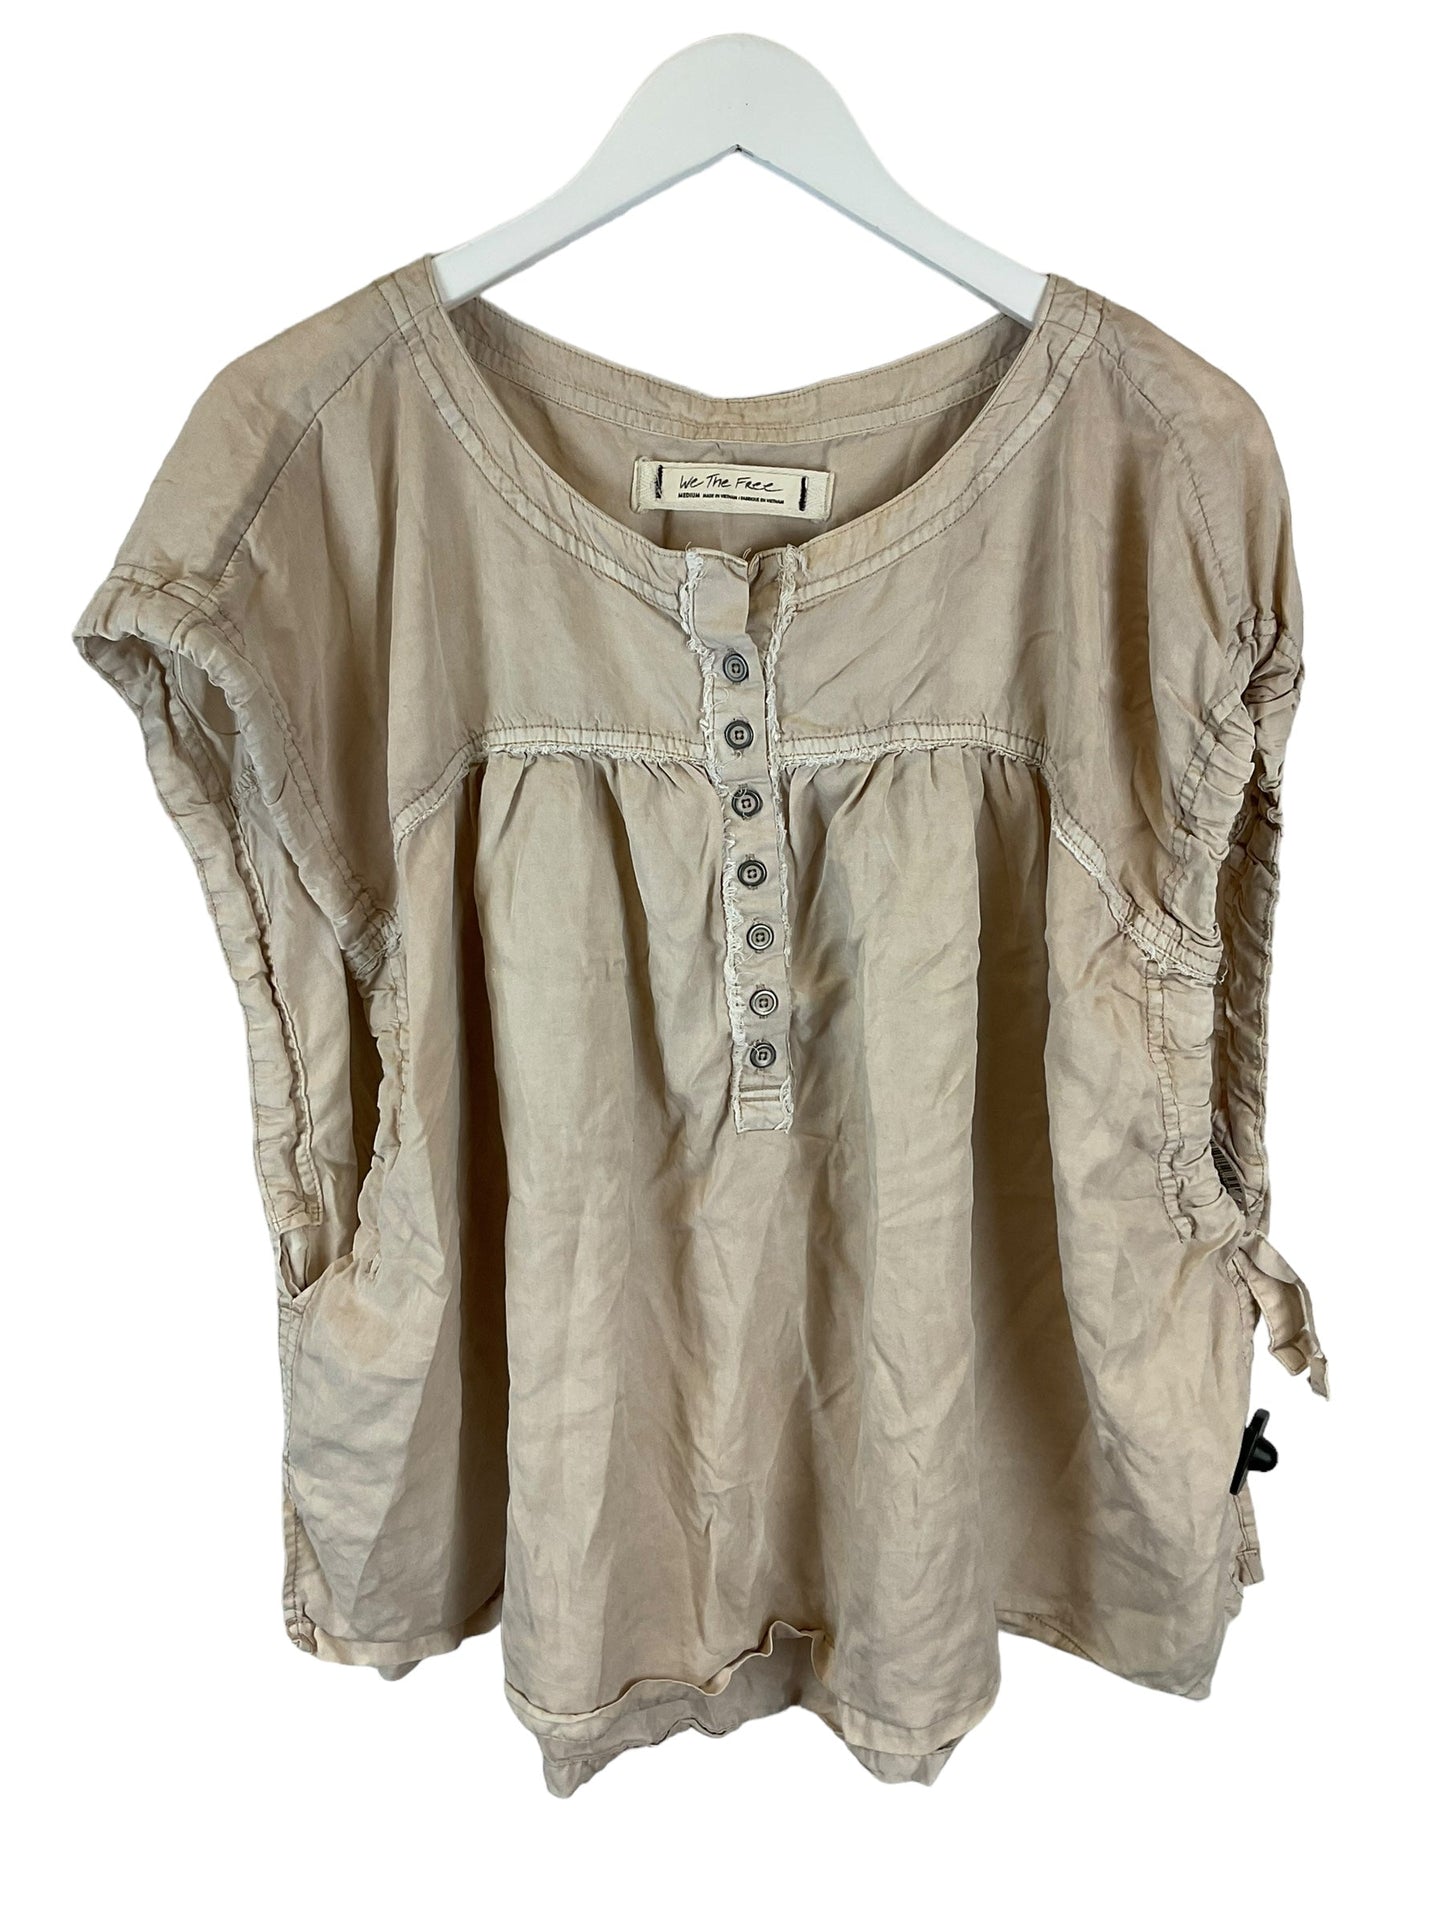 Tan Top Short Sleeve We The Free, Size M